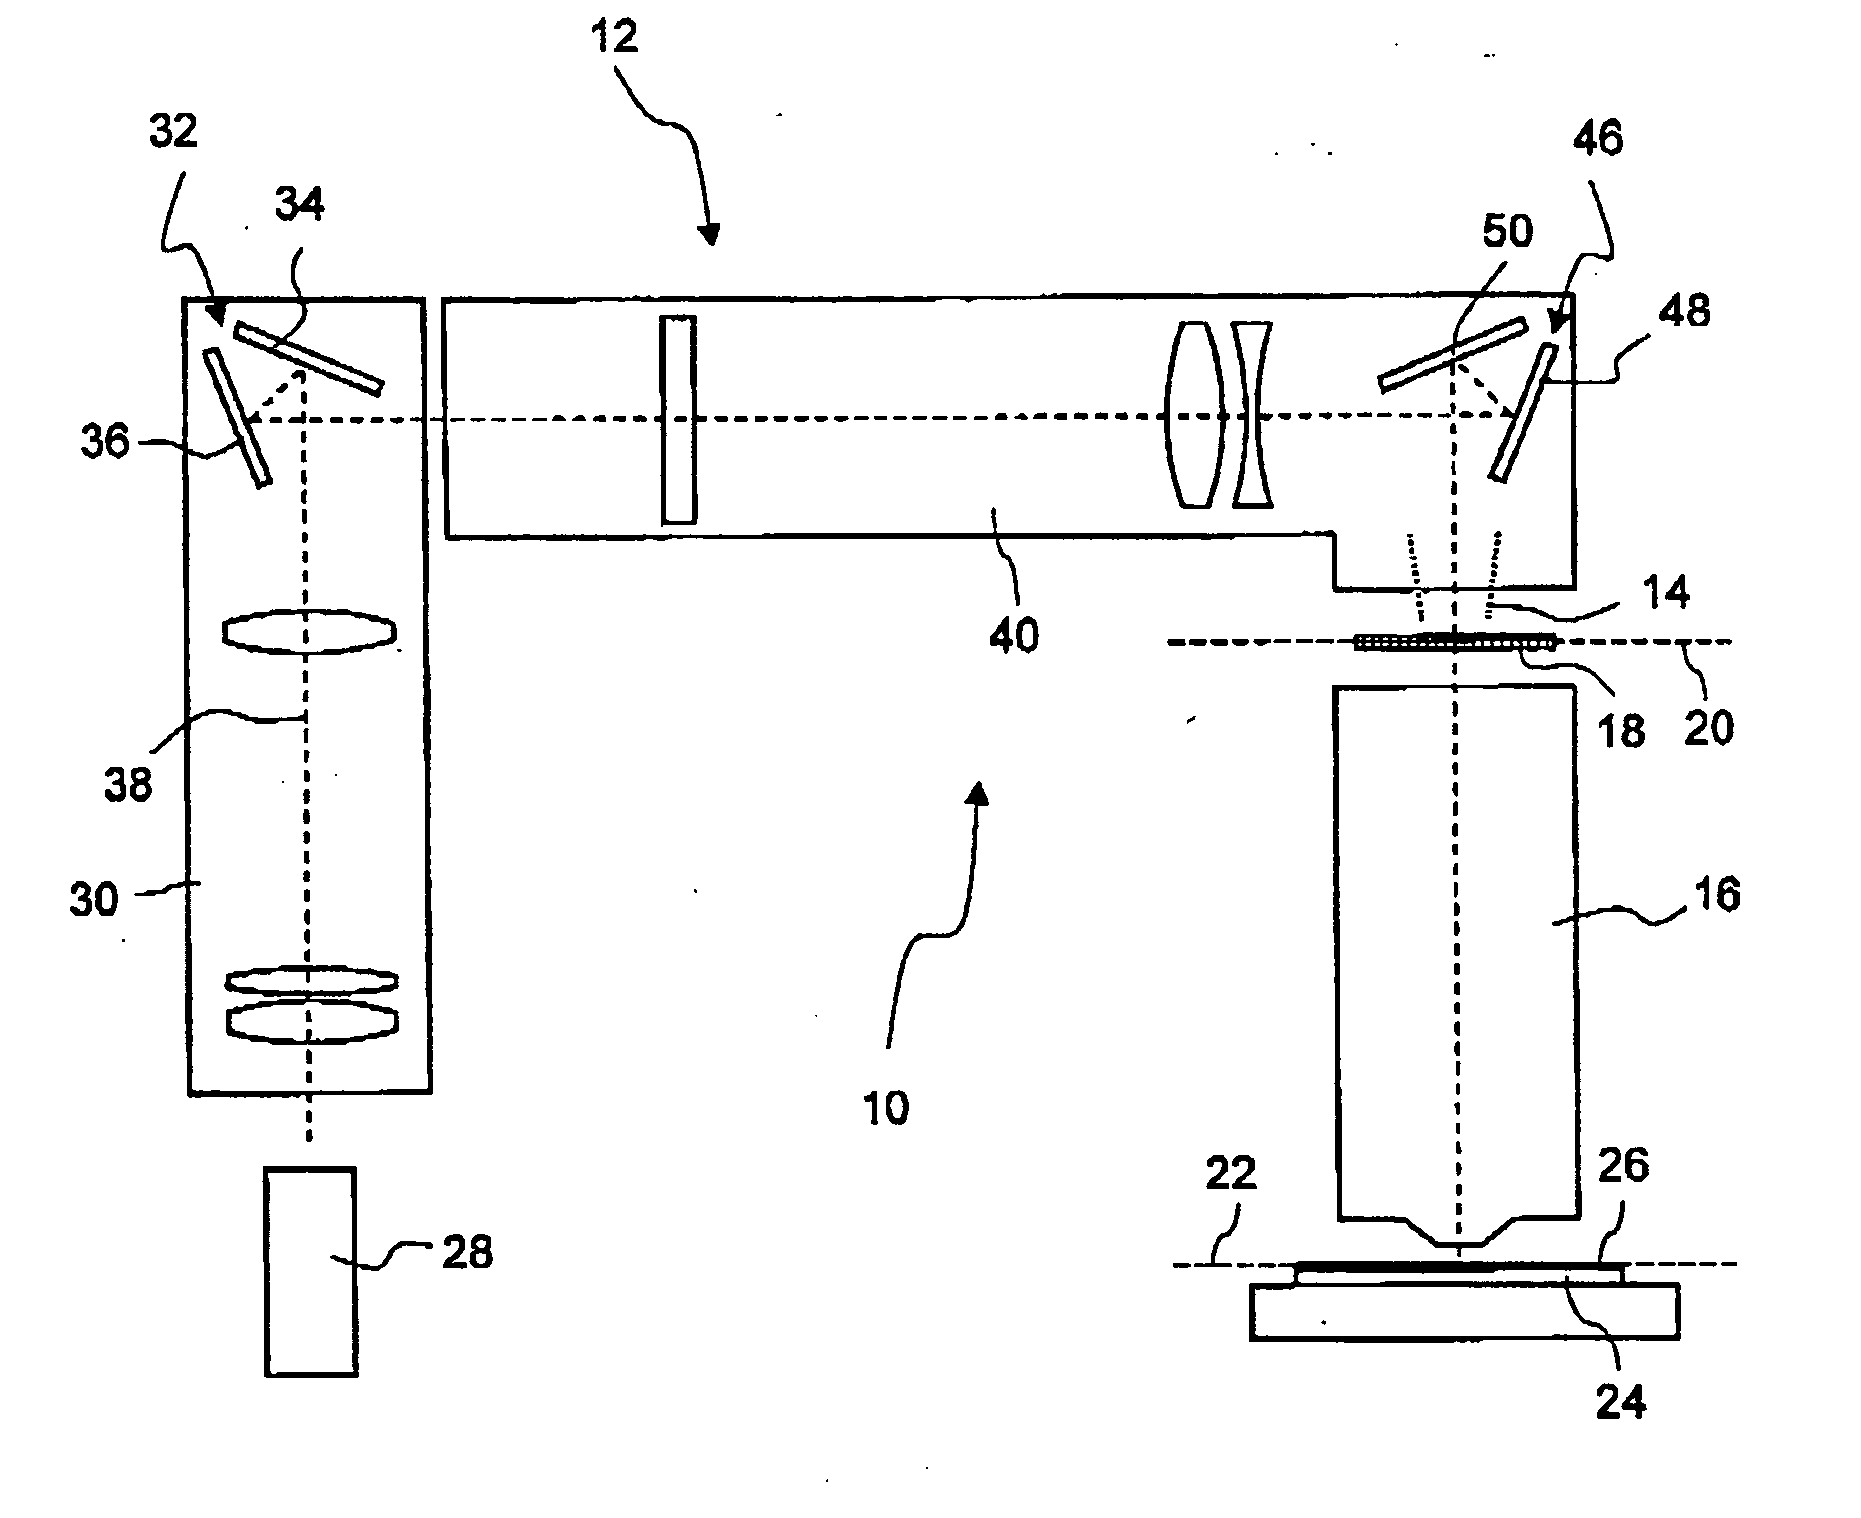 Optical system, in particular illumination system, of a microlithographic projection exposure apparatus